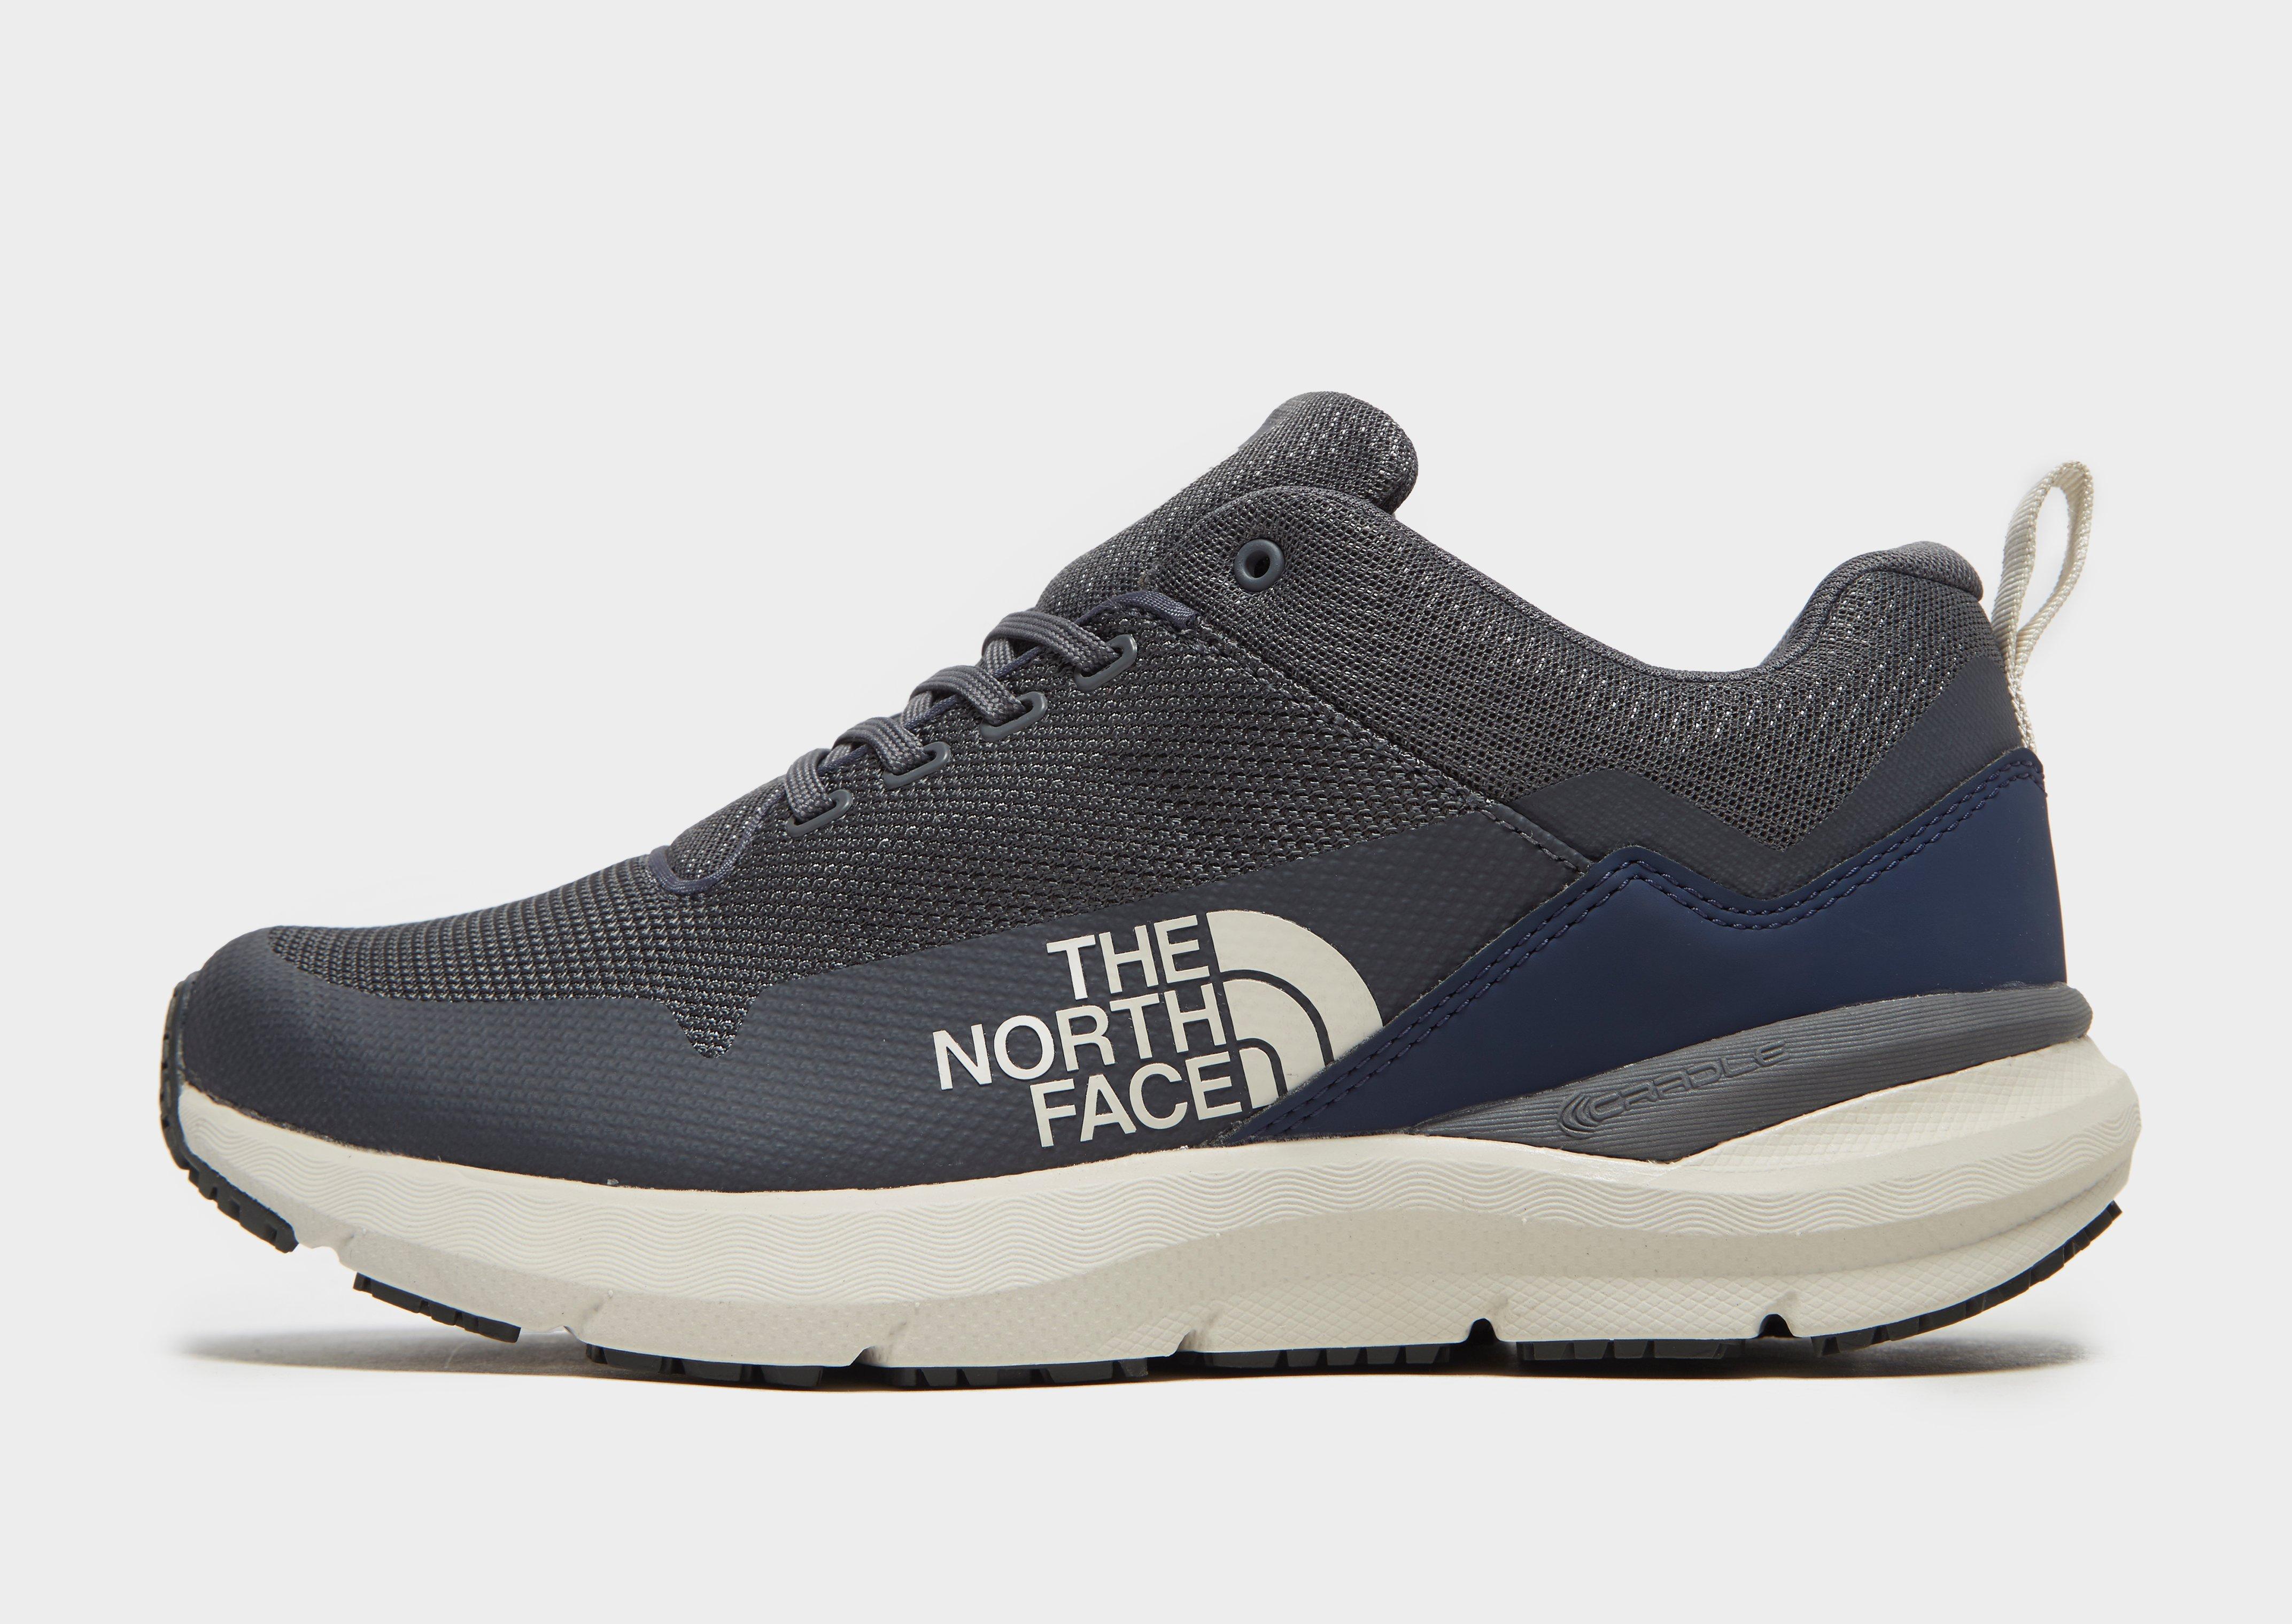 jd north face trainers